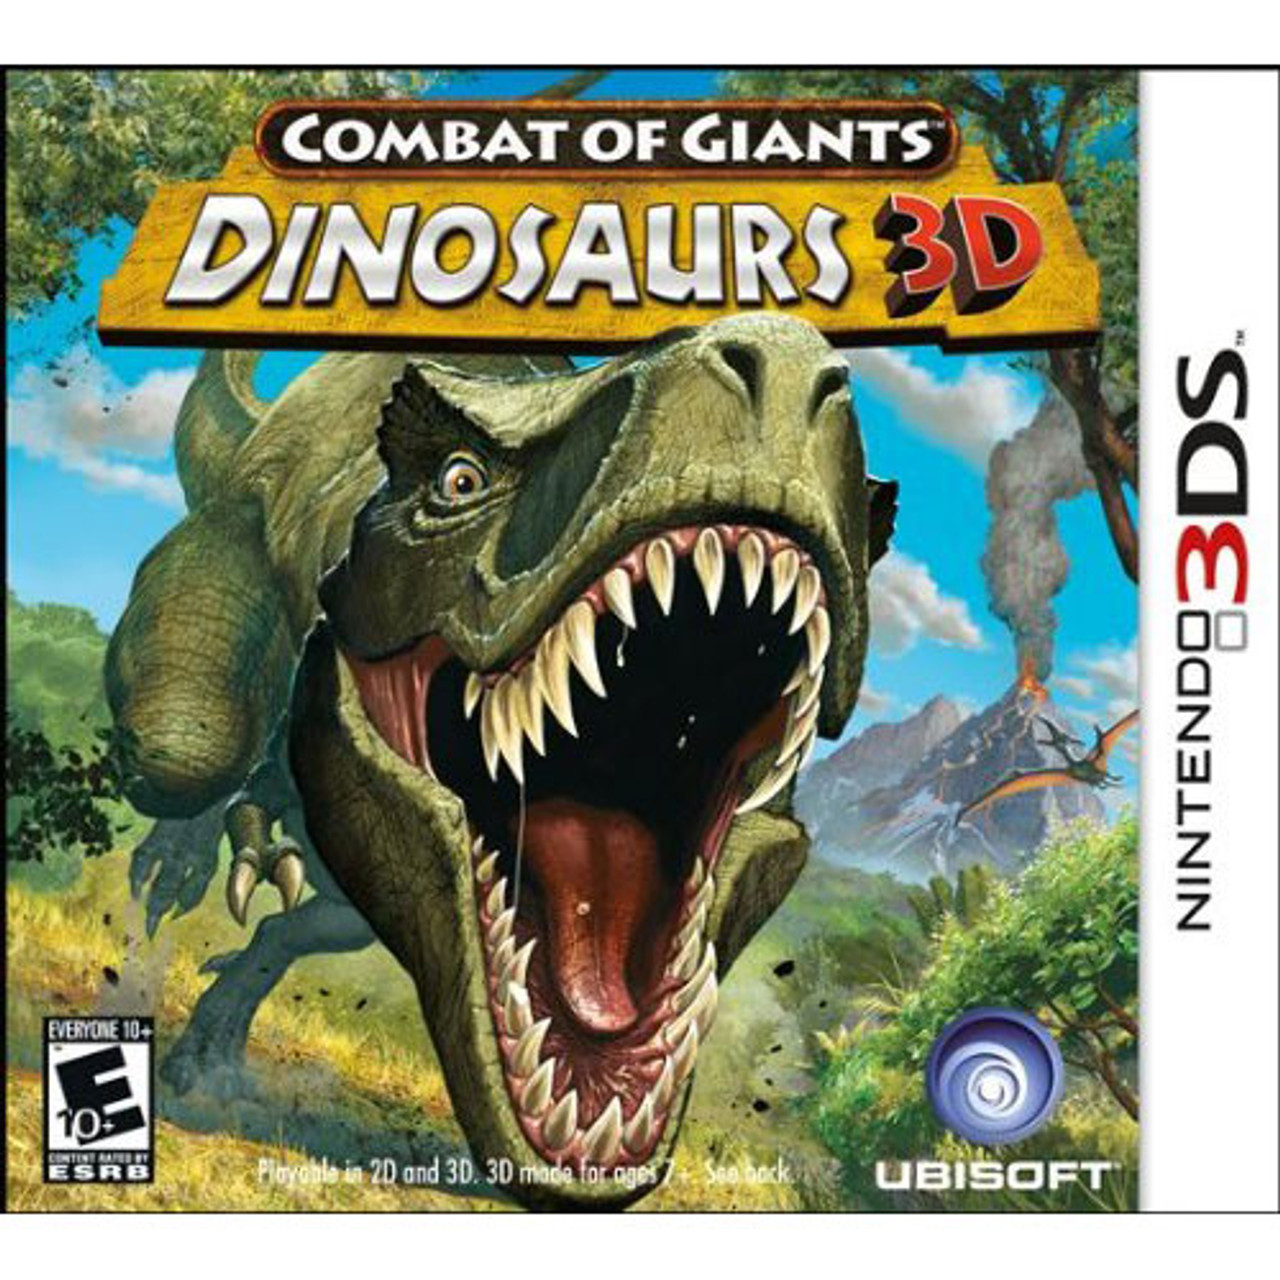 Combat of Giants Dinosaurs 3D 3DS Game For Sale DKOldies